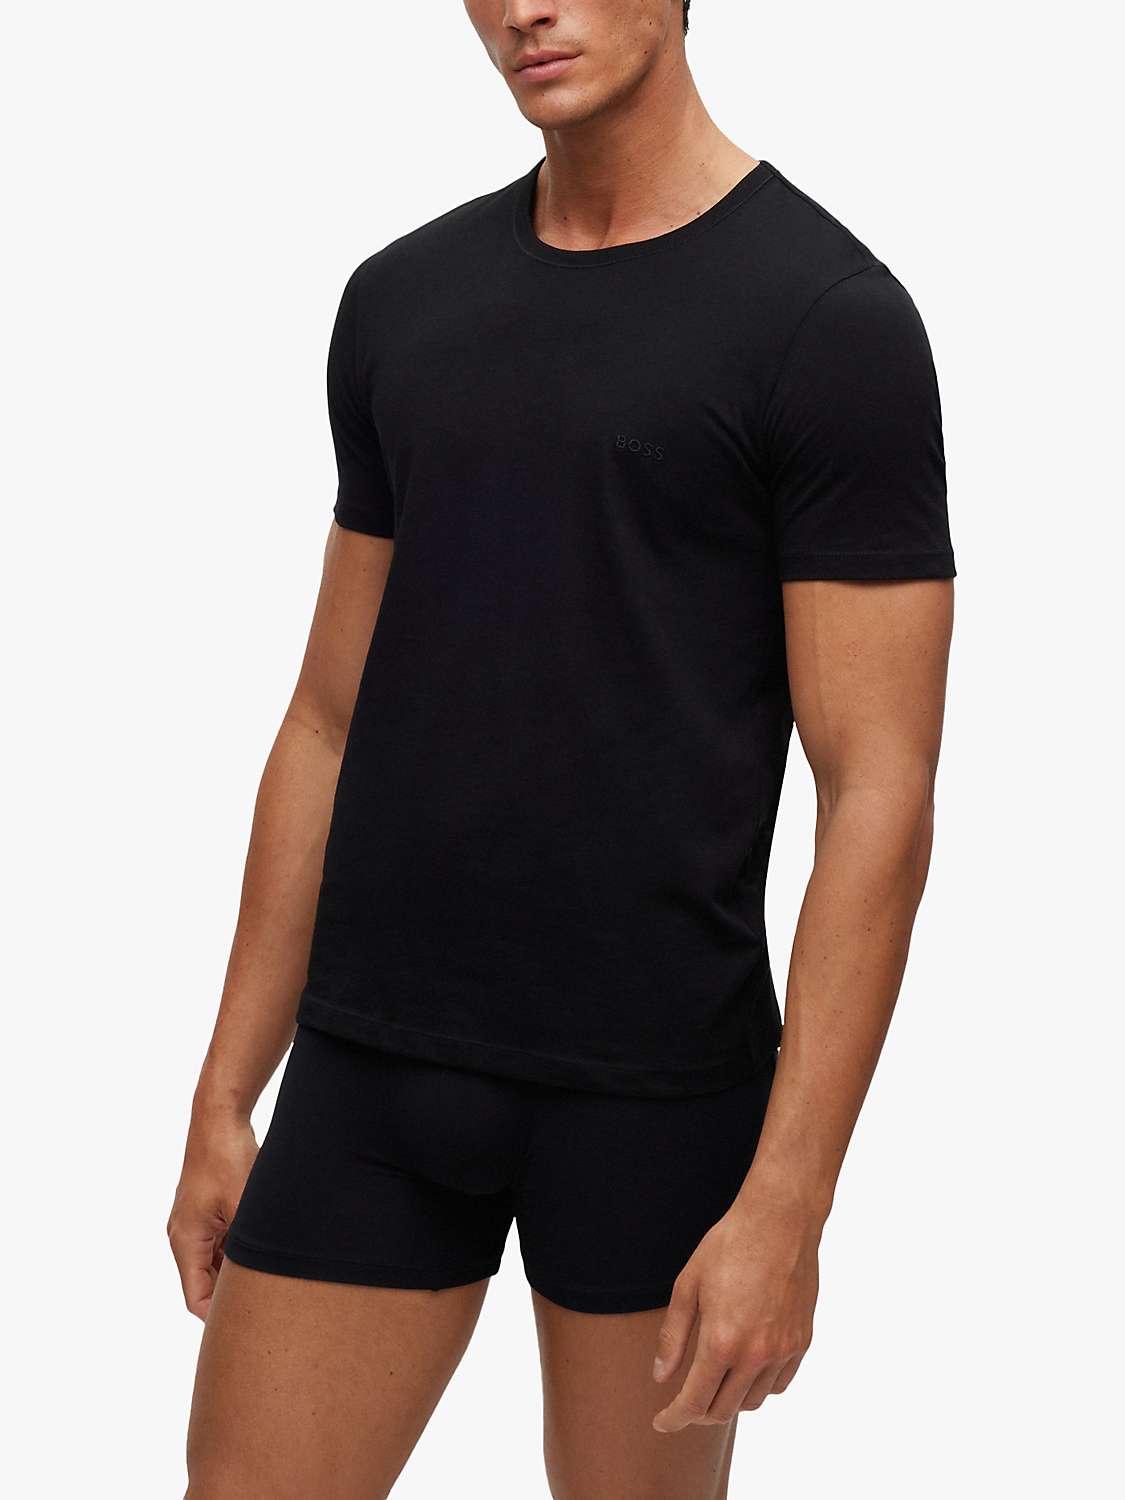 Buy HUGO BOSS Embroidered Logo Cotton T-Shirt, Pack of 3 Online at johnlewis.com